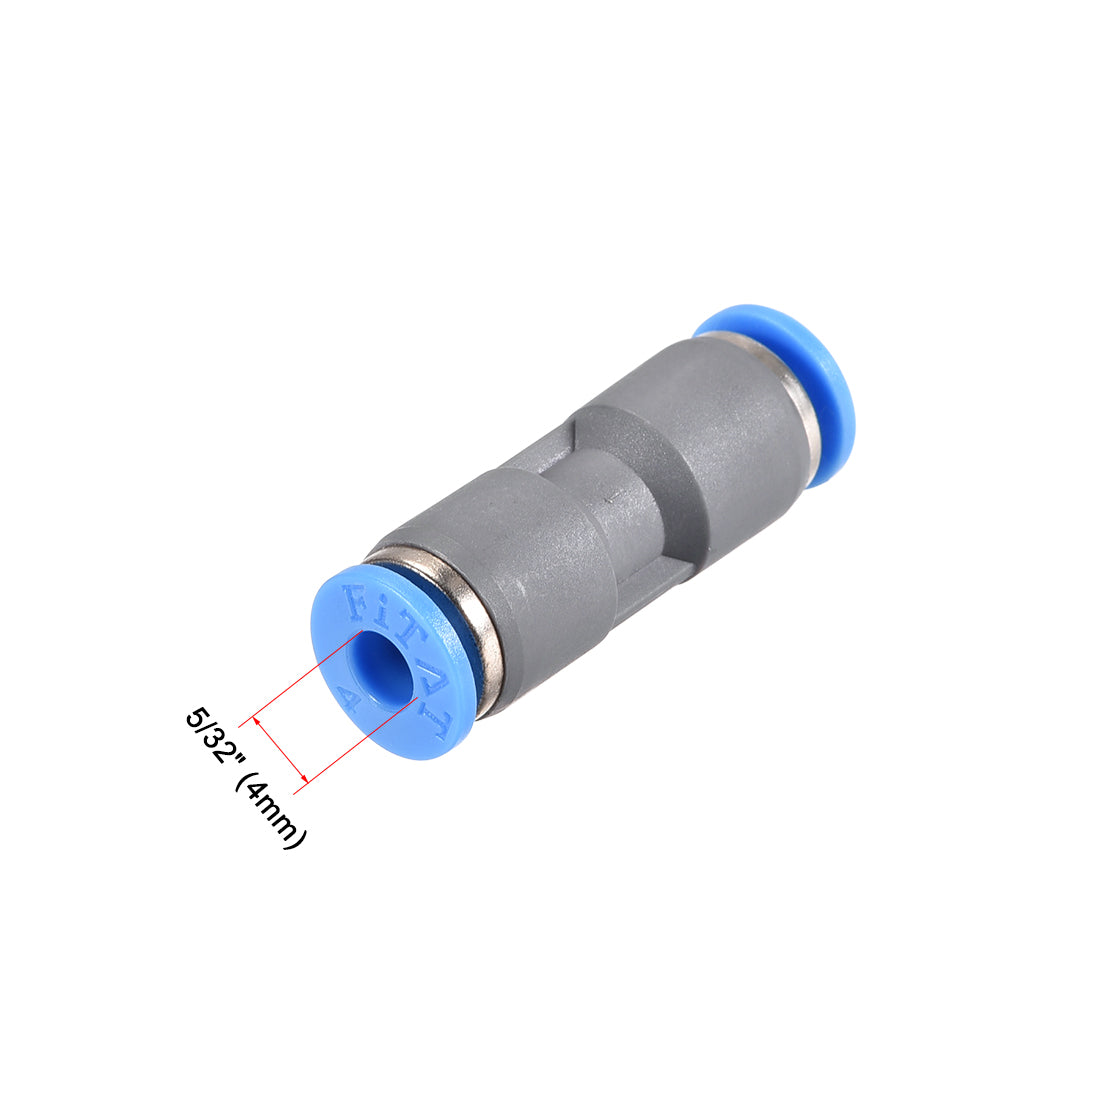 uxcell Uxcell Straight Push Connectors 4mm Quick Release Pneumatic Connector Plastic Union Pipe Tube Fitting Grey 5Pcs